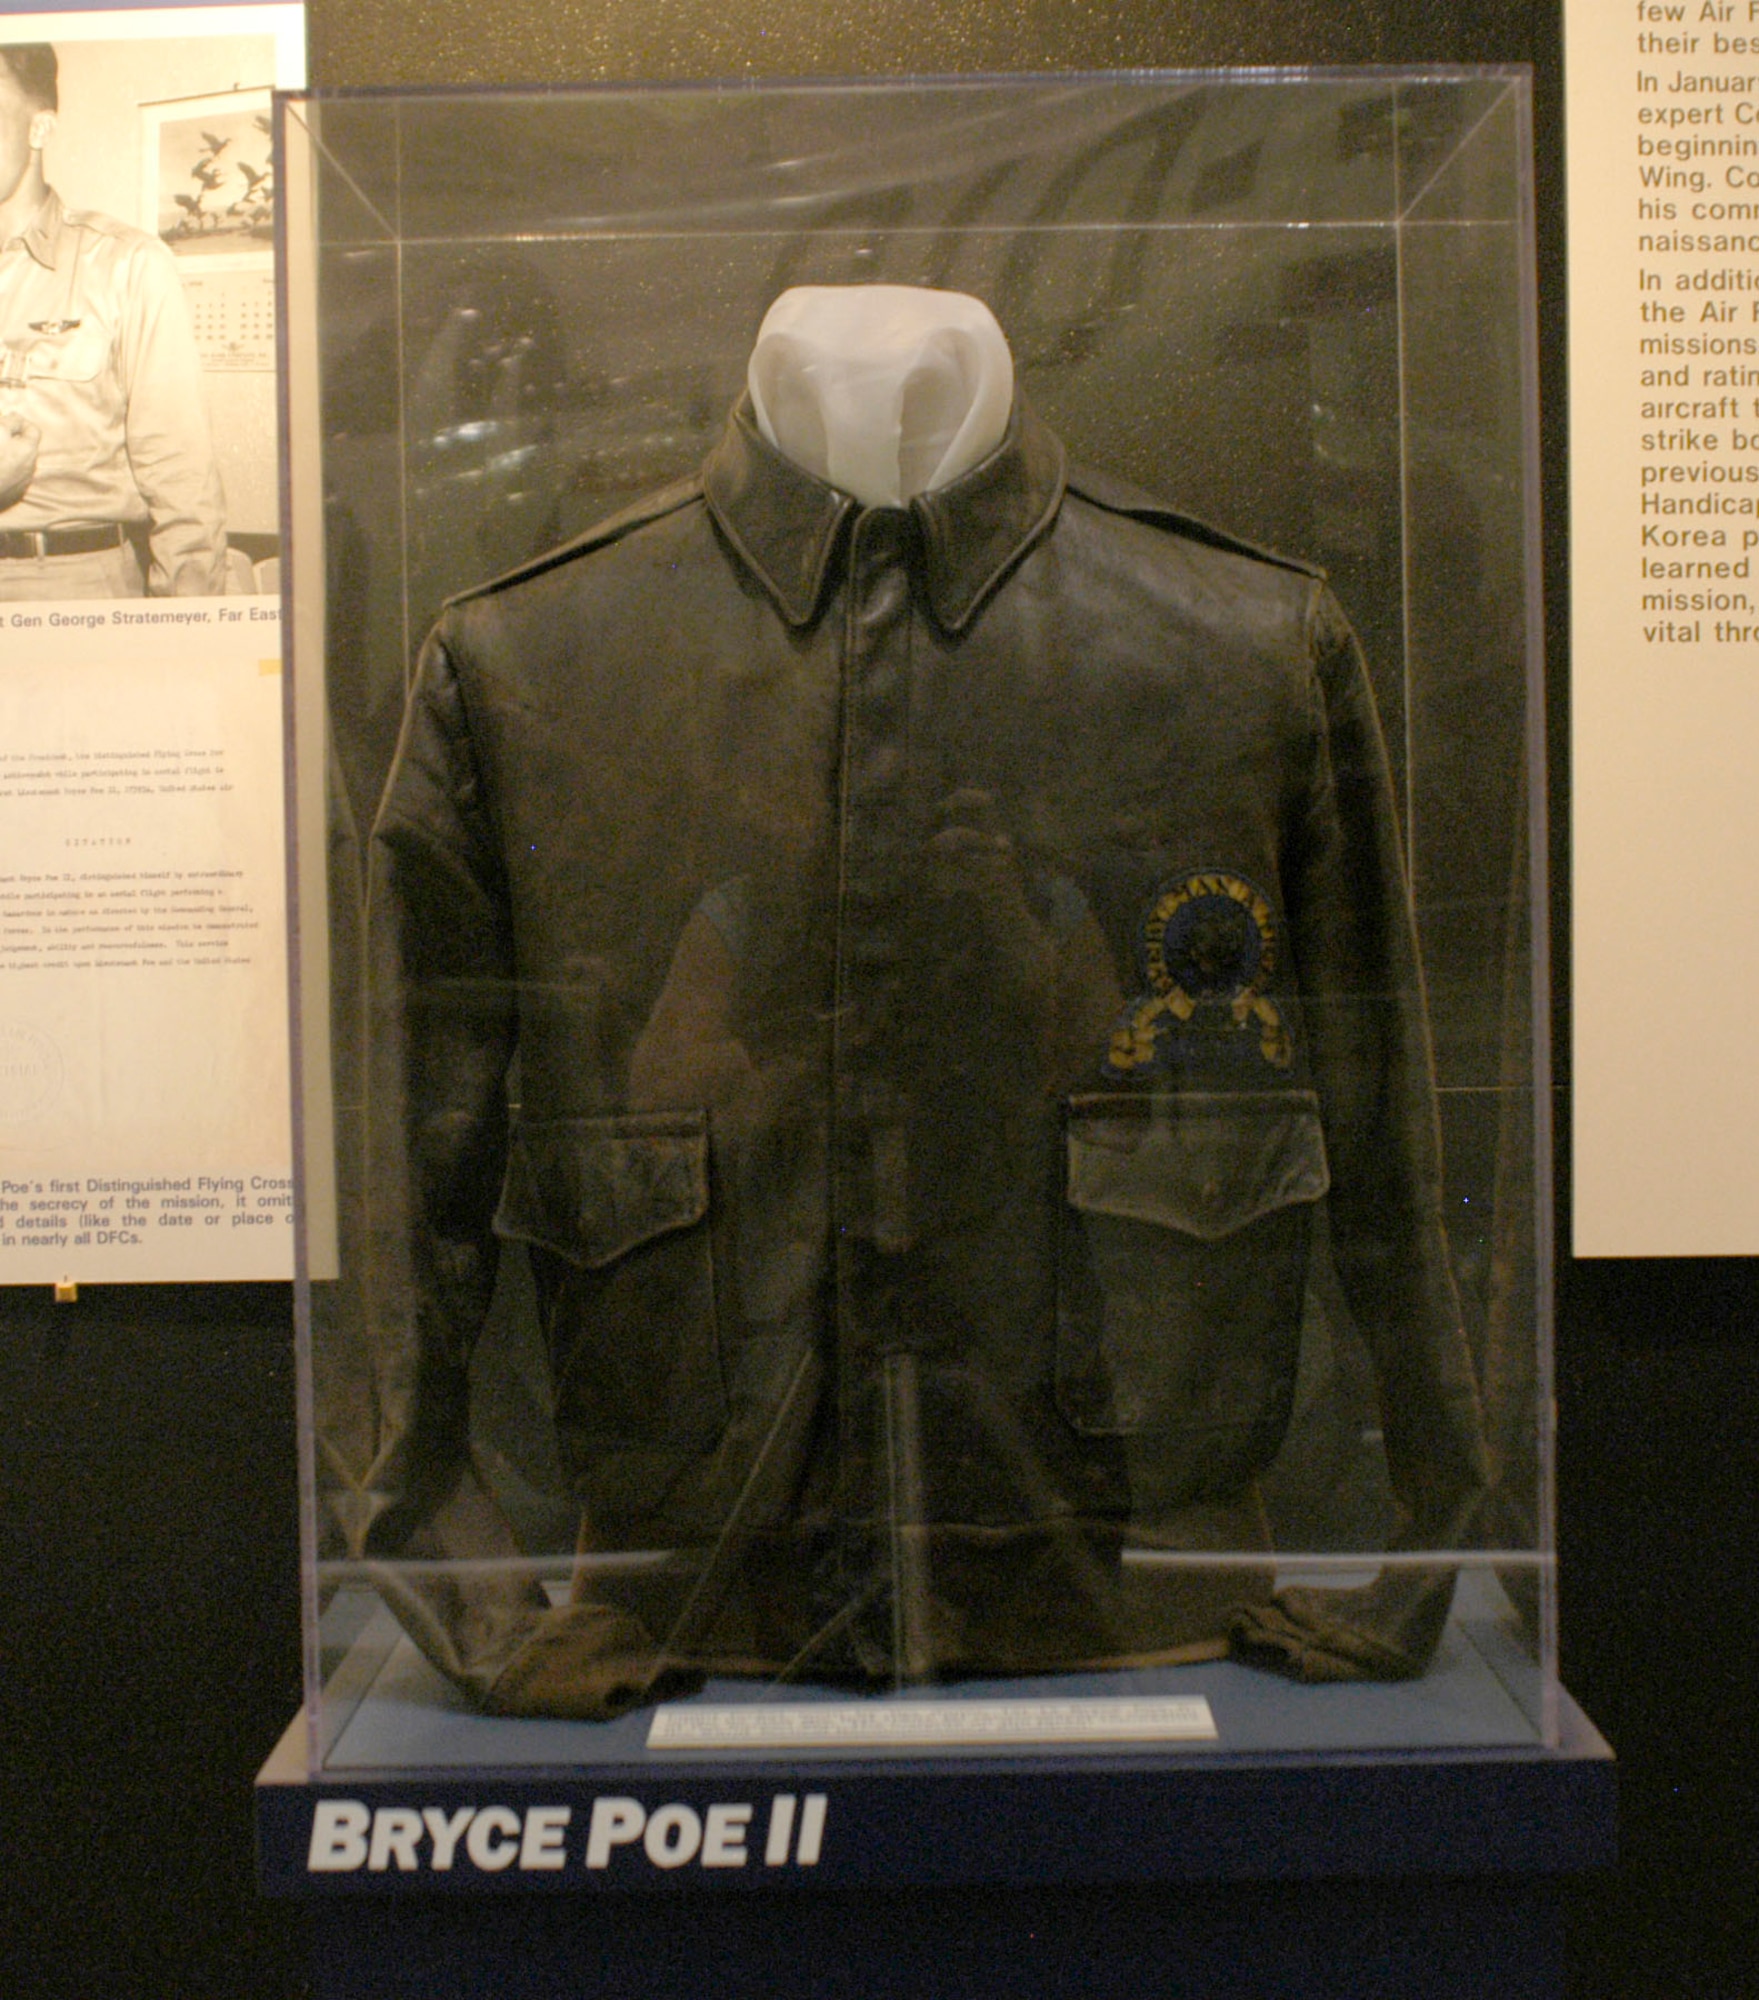 DAYTON, Ohio -- Flight jacket worn by the donor, 1st Lt. Bryce Poe II, when he flew the first U.S. Air Force jet reconnaissance mission of the Korean War. The insignia on the jacket represents the 82nd Tactical Reconnaissance Squadron. The jacket is on display in the Korean War Gallery at the National Museum of the U.S. Air Force. (U.S. Air Force photo)